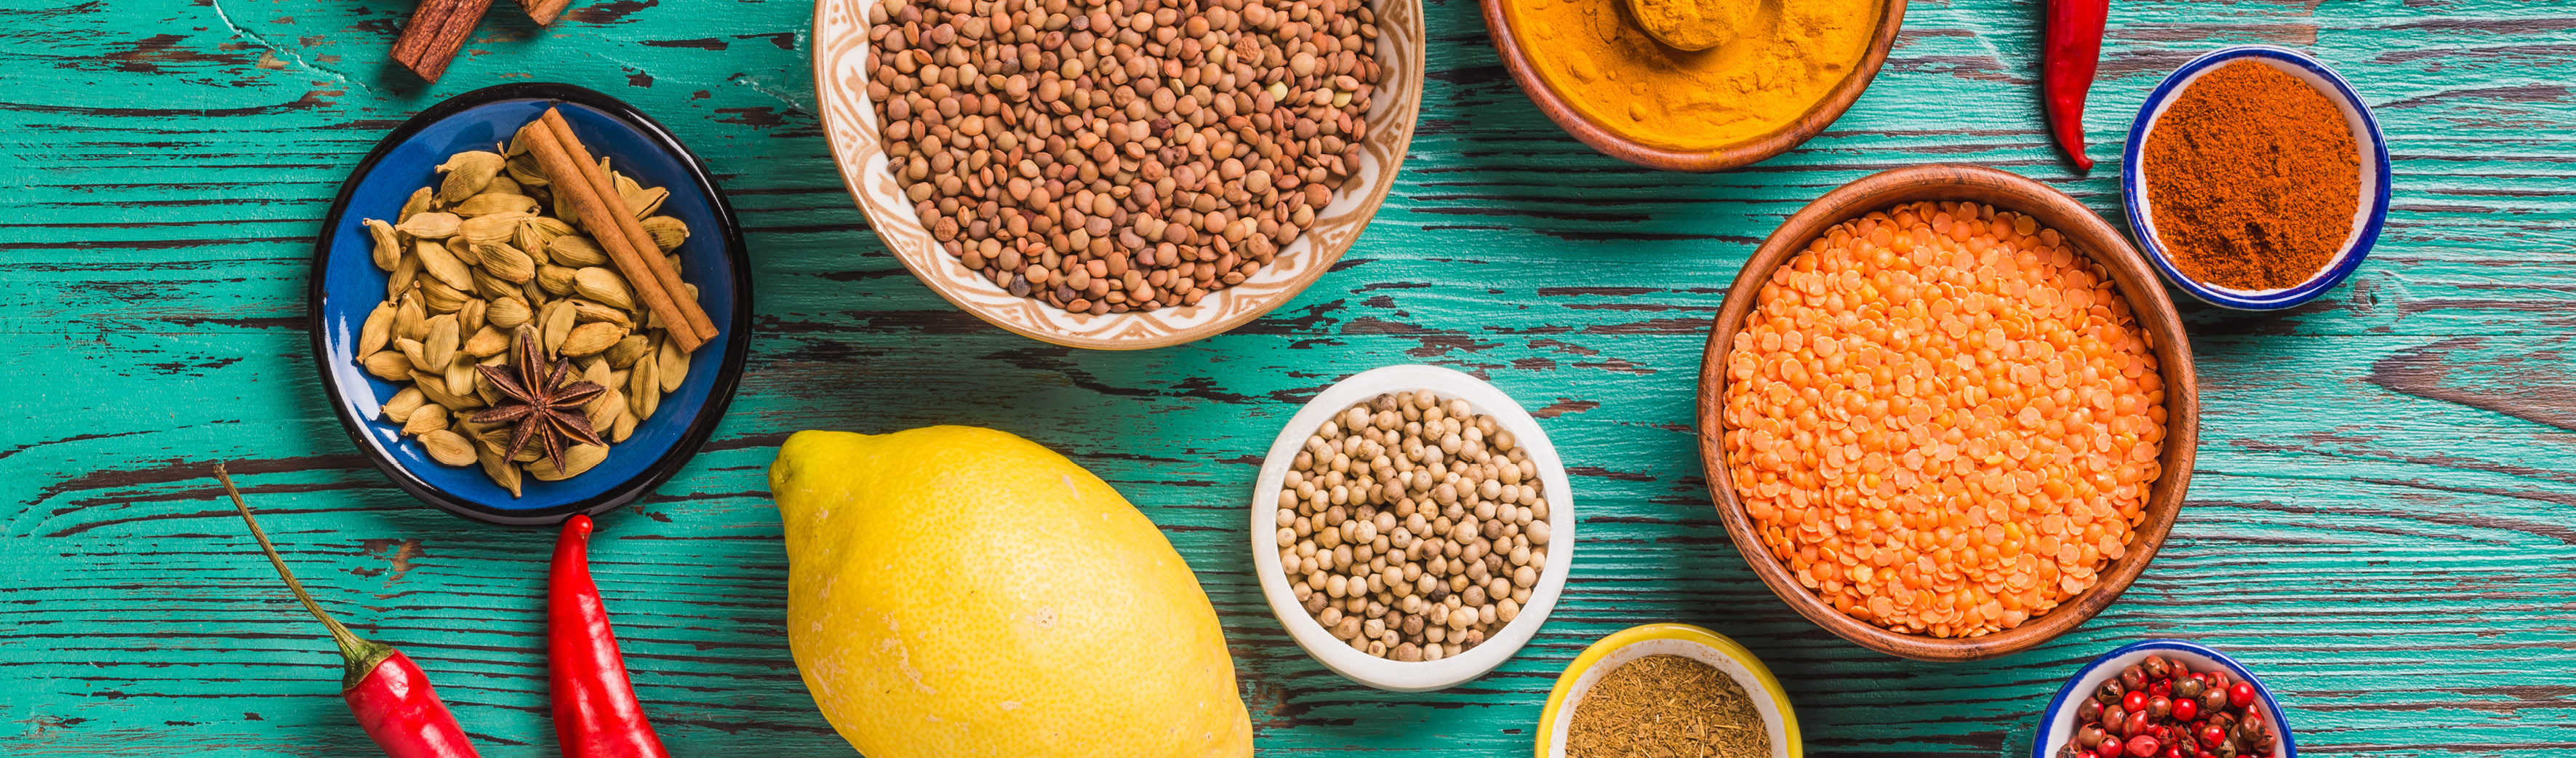 5 Superfoods to Boost Your Immune System